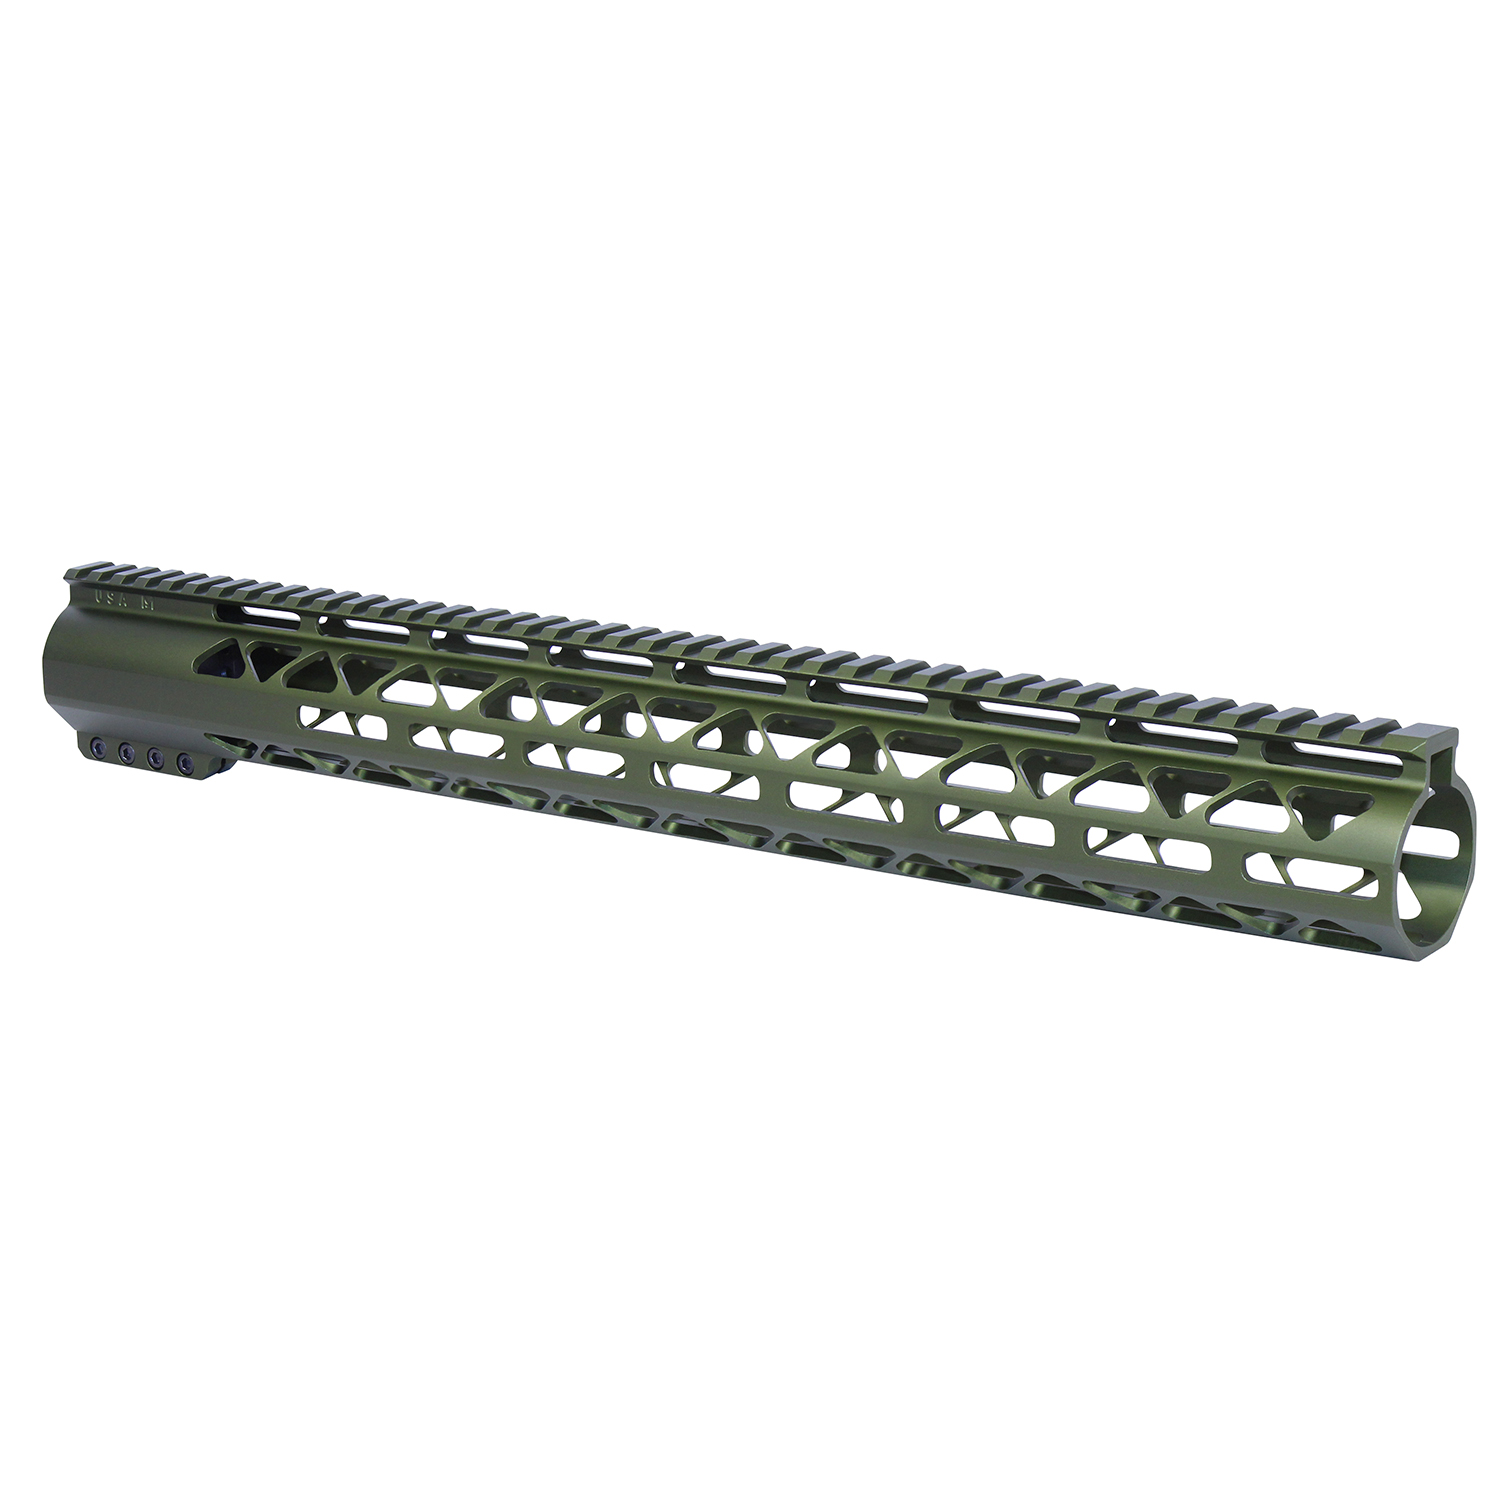 16.5" AIR-LOK Series M-LOK Compression Free Floating Handguard With Monolithic Top Rail (.308 Cal) (Anodized Green)